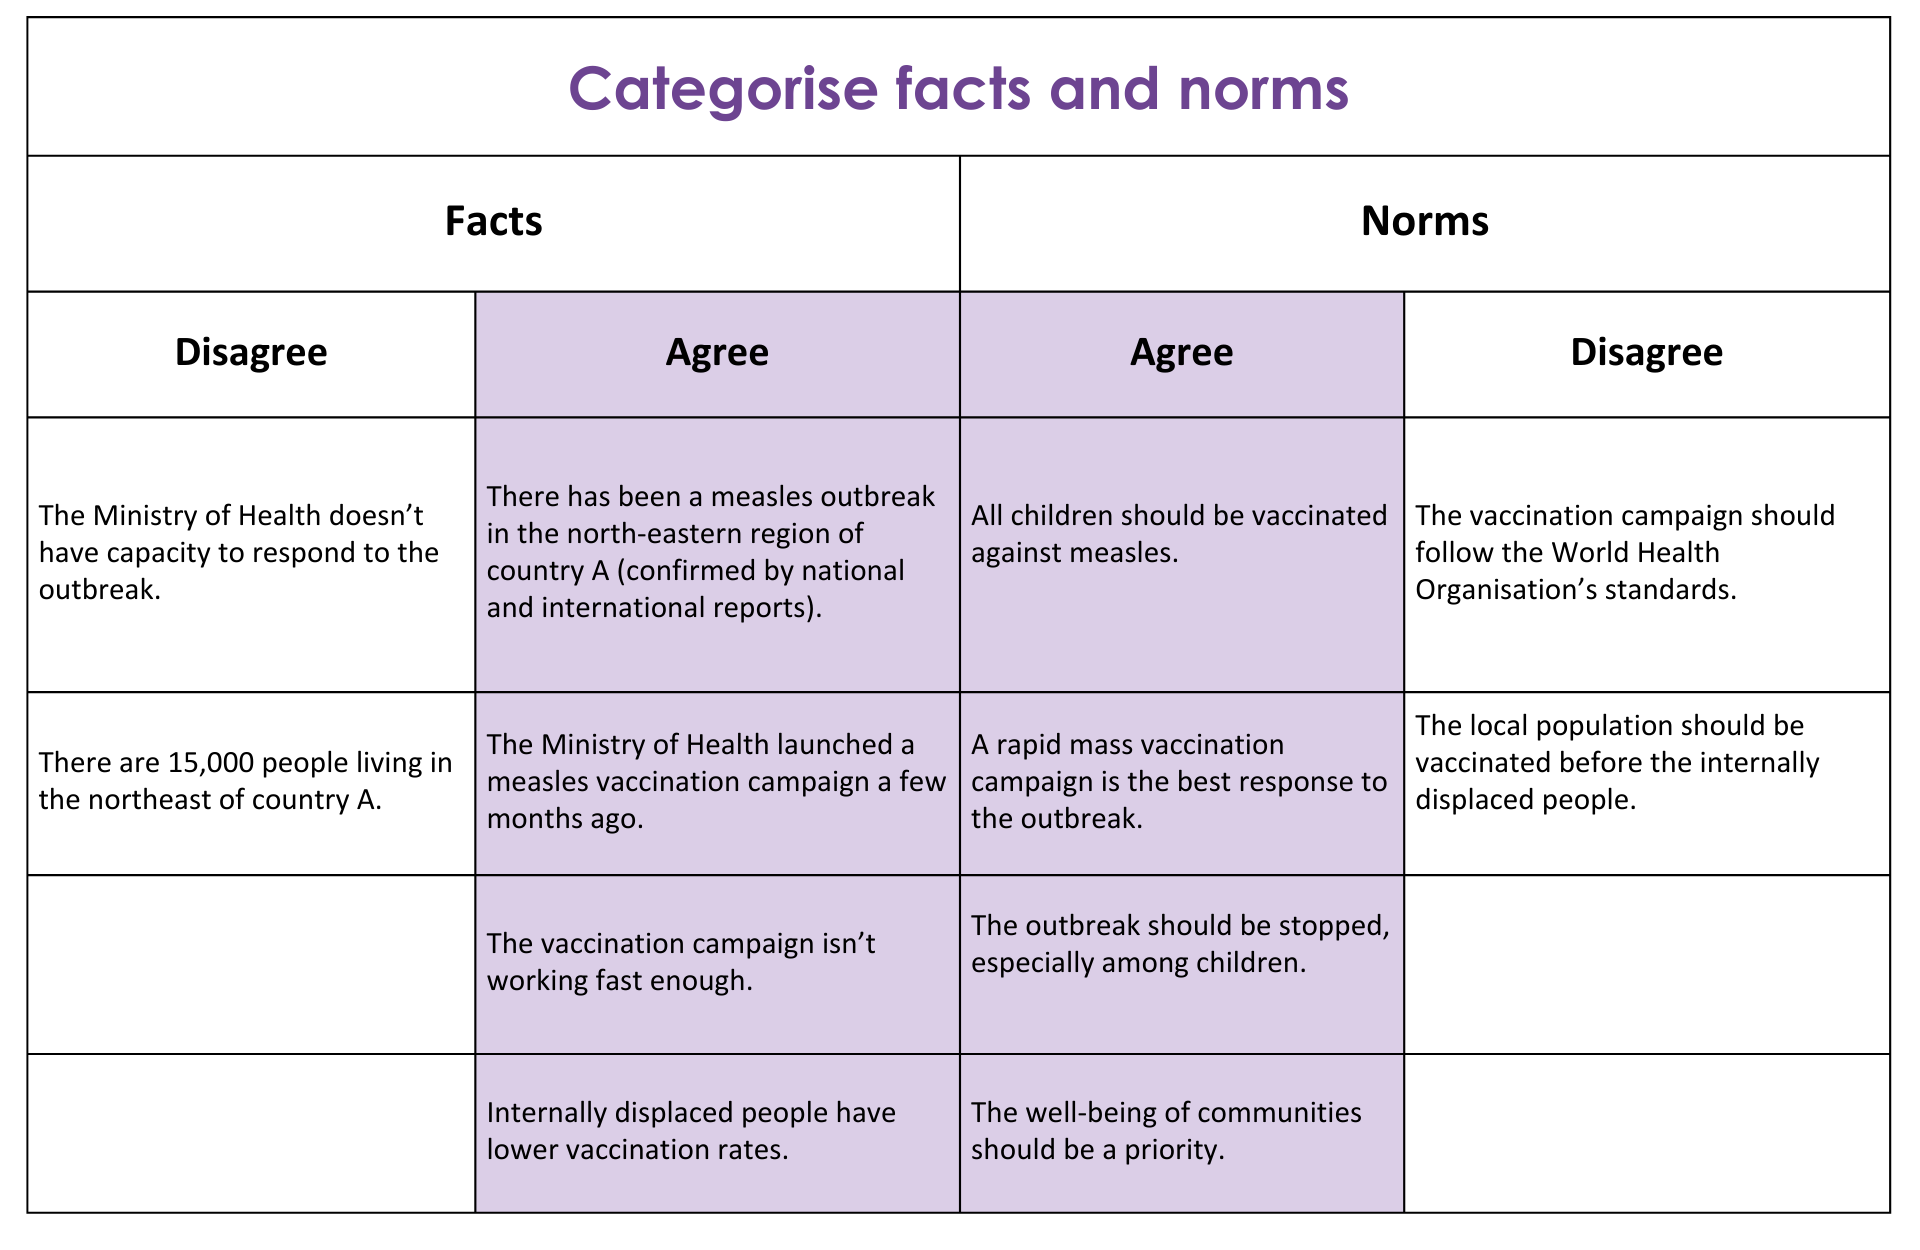 Sort information into agreed facts and norms, and disagreed facts and norms. For example, you and your counterpart can agree that there is a measles outbreak (agreed fact) and that all children should be vaccinated (agreed norm). However, you might disagree how many people there are (disagreed fact) and what health standards should be followed (disagreed norm). Focus on the agreed facts and norms to build your opening argument.